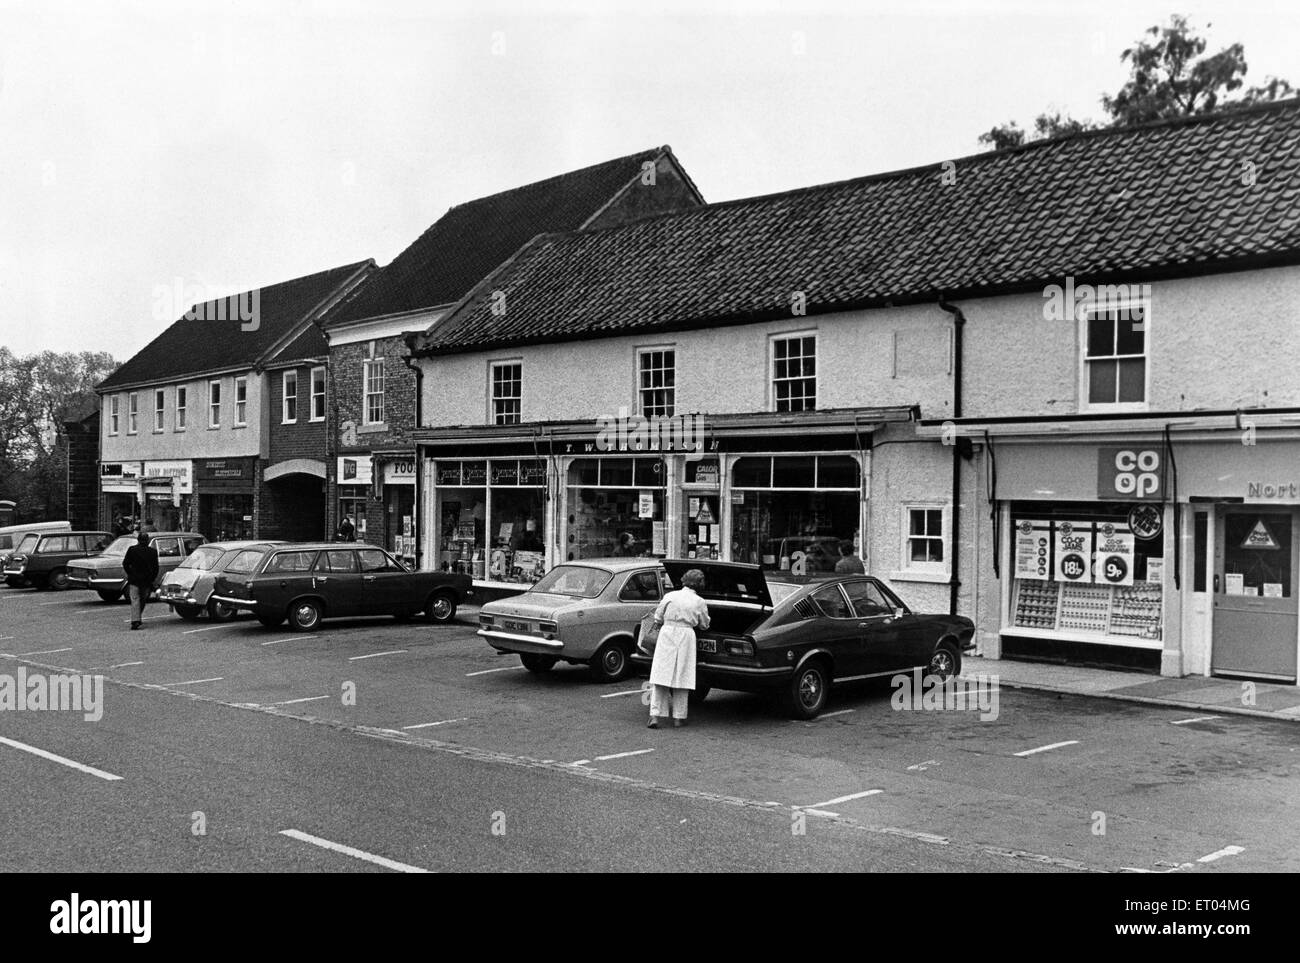 Shopping in Great Ayton, North Yorkshire, and the region's villages can be pleasant and leisurely compared to the bustle and parking problems of the town. 27th May 1976. Stock Photo